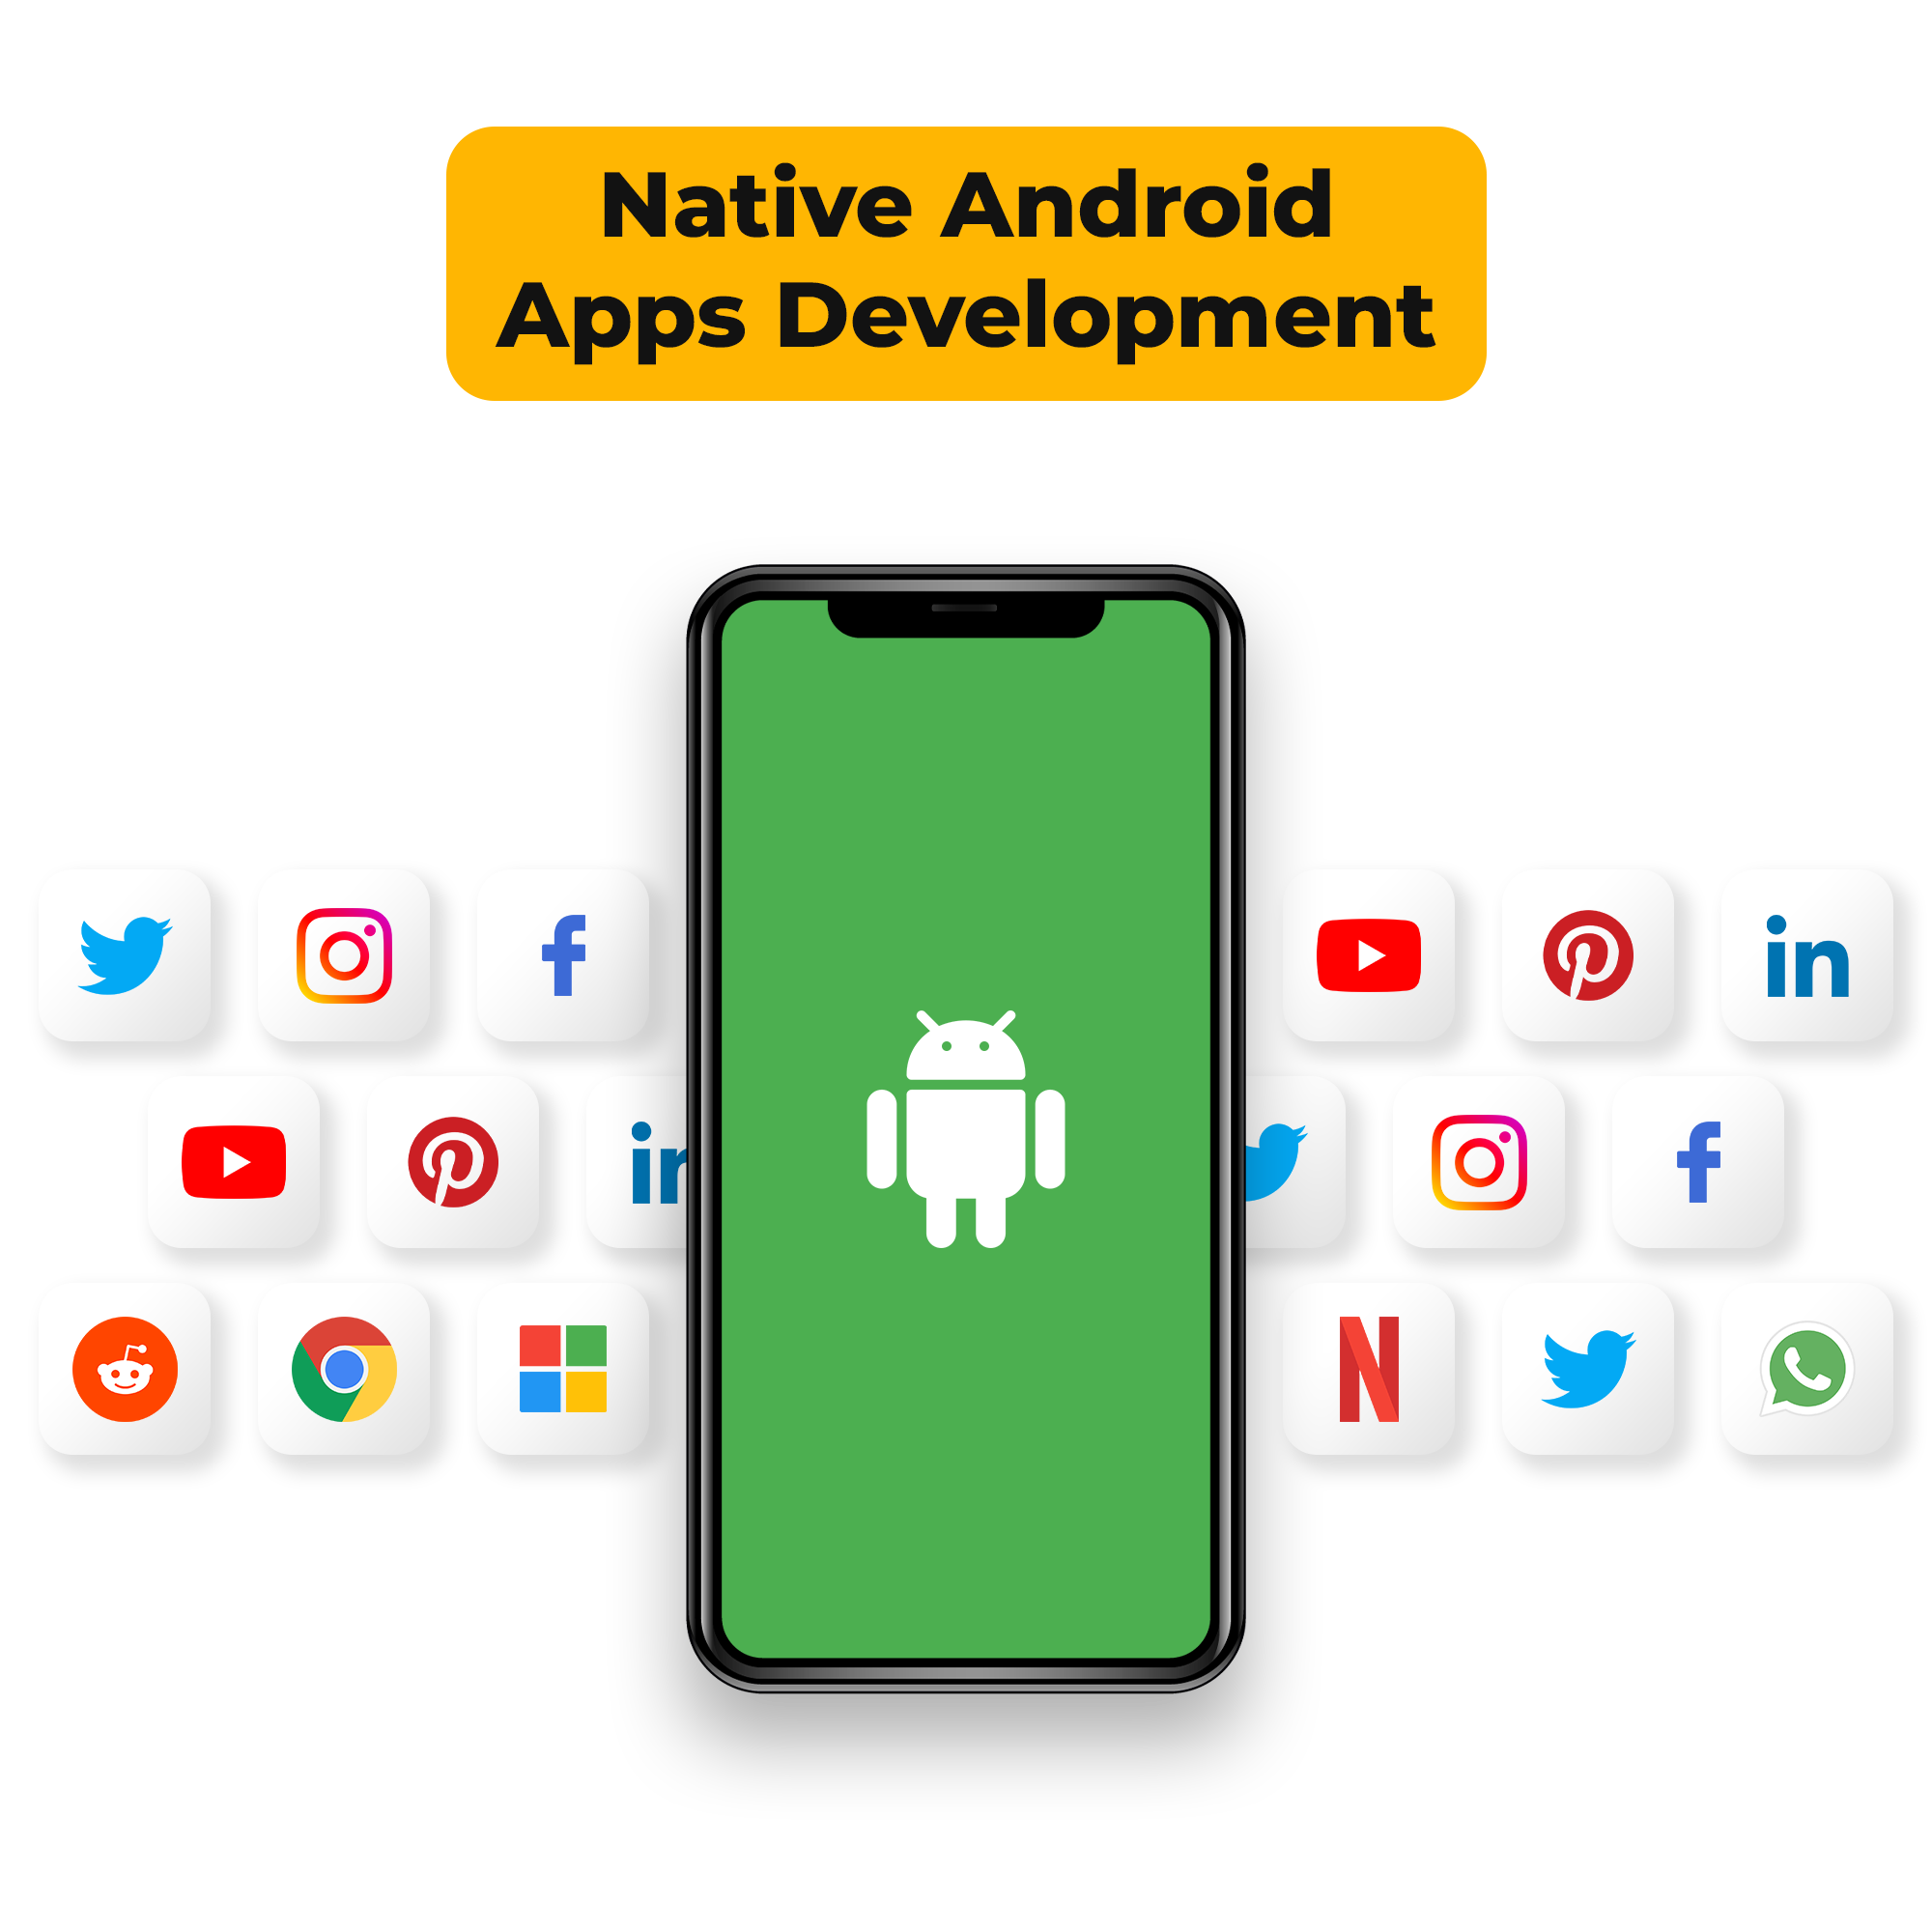 Native Android apps